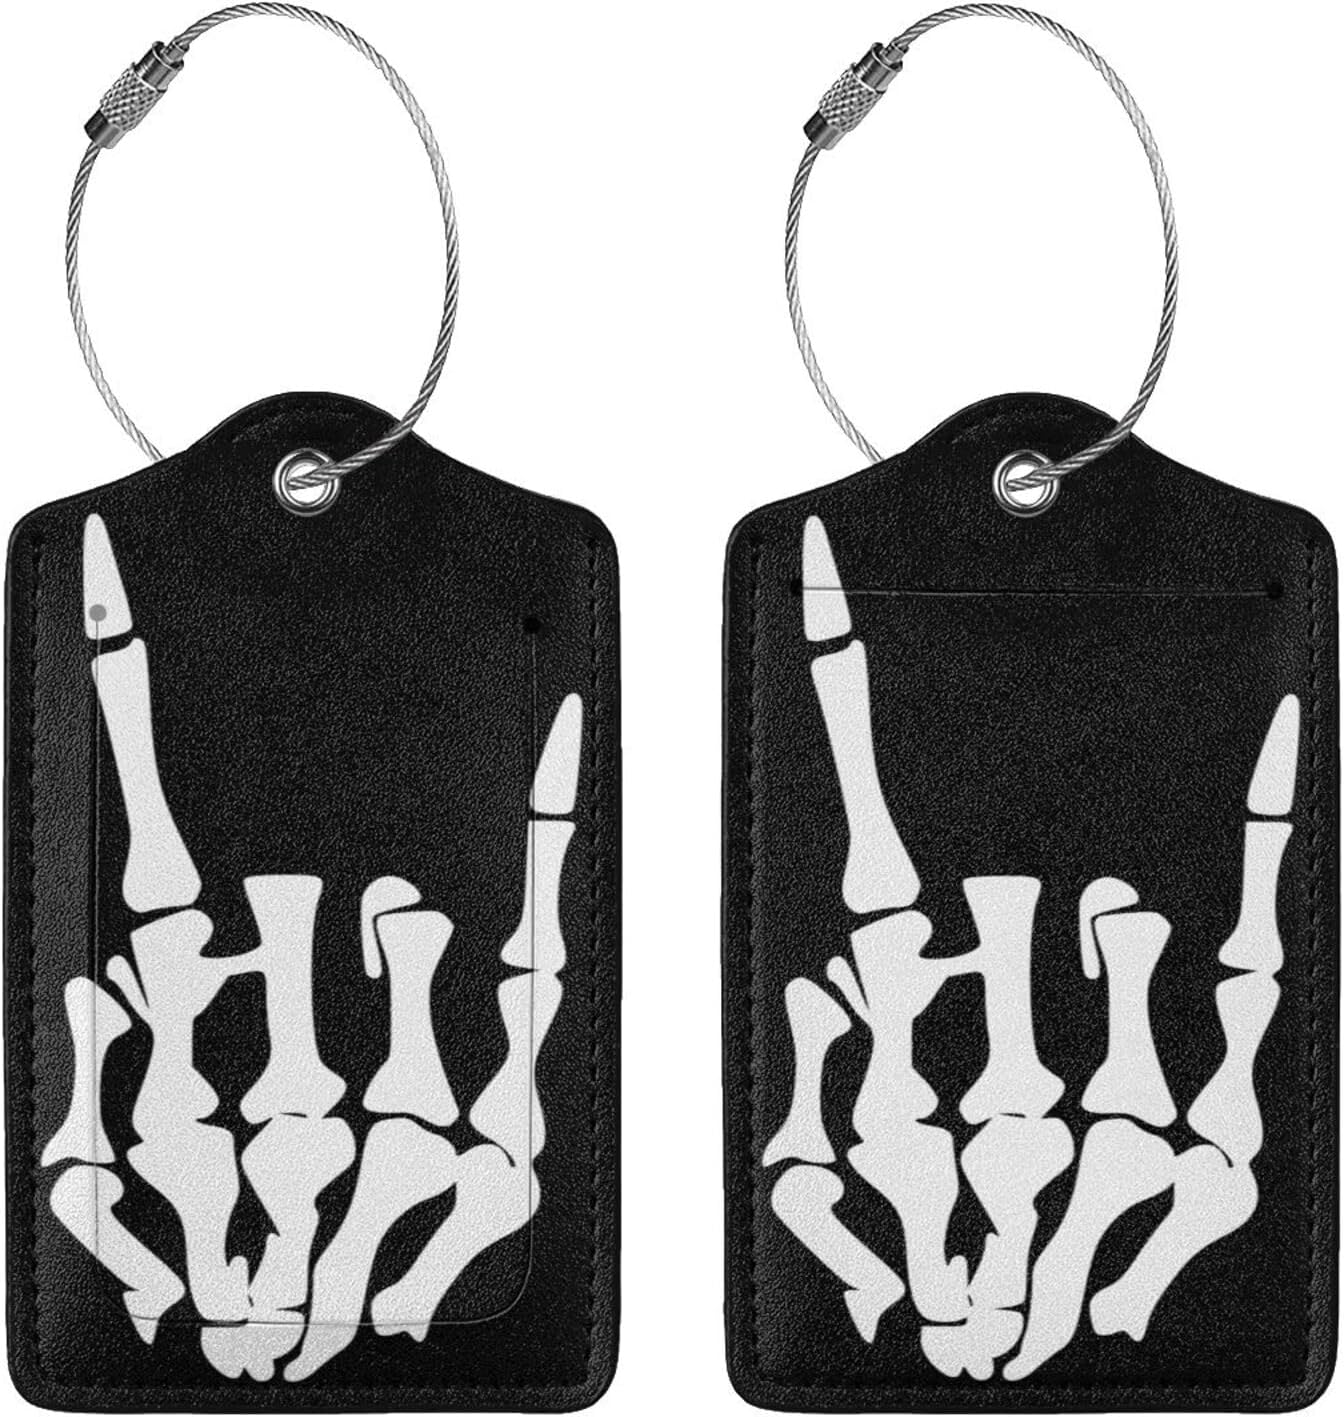 2 Pcs Skull Luggage Tags for Suitcases, Funny Halloween Luggage Tag, Skeleton Hand Decor, Christmas Birthday Gifts for Women Men Uncle Auntie Brother Sister Grandpa Grandma Cruise Ships